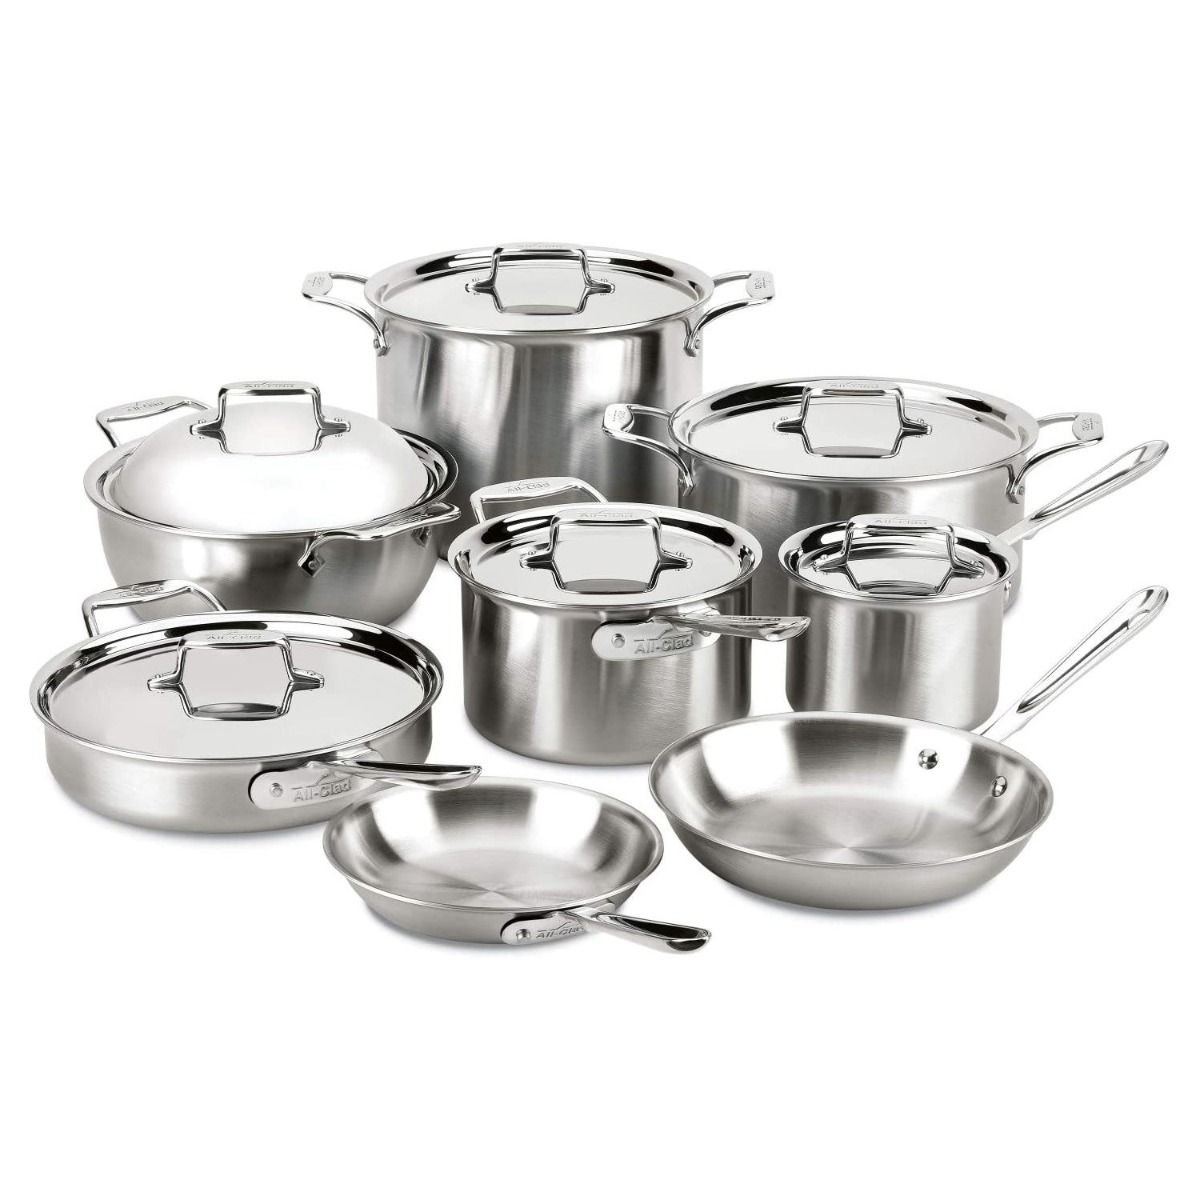 D5 Brushed Stainless Steel 14-Piece Cookware Set, All-Clad